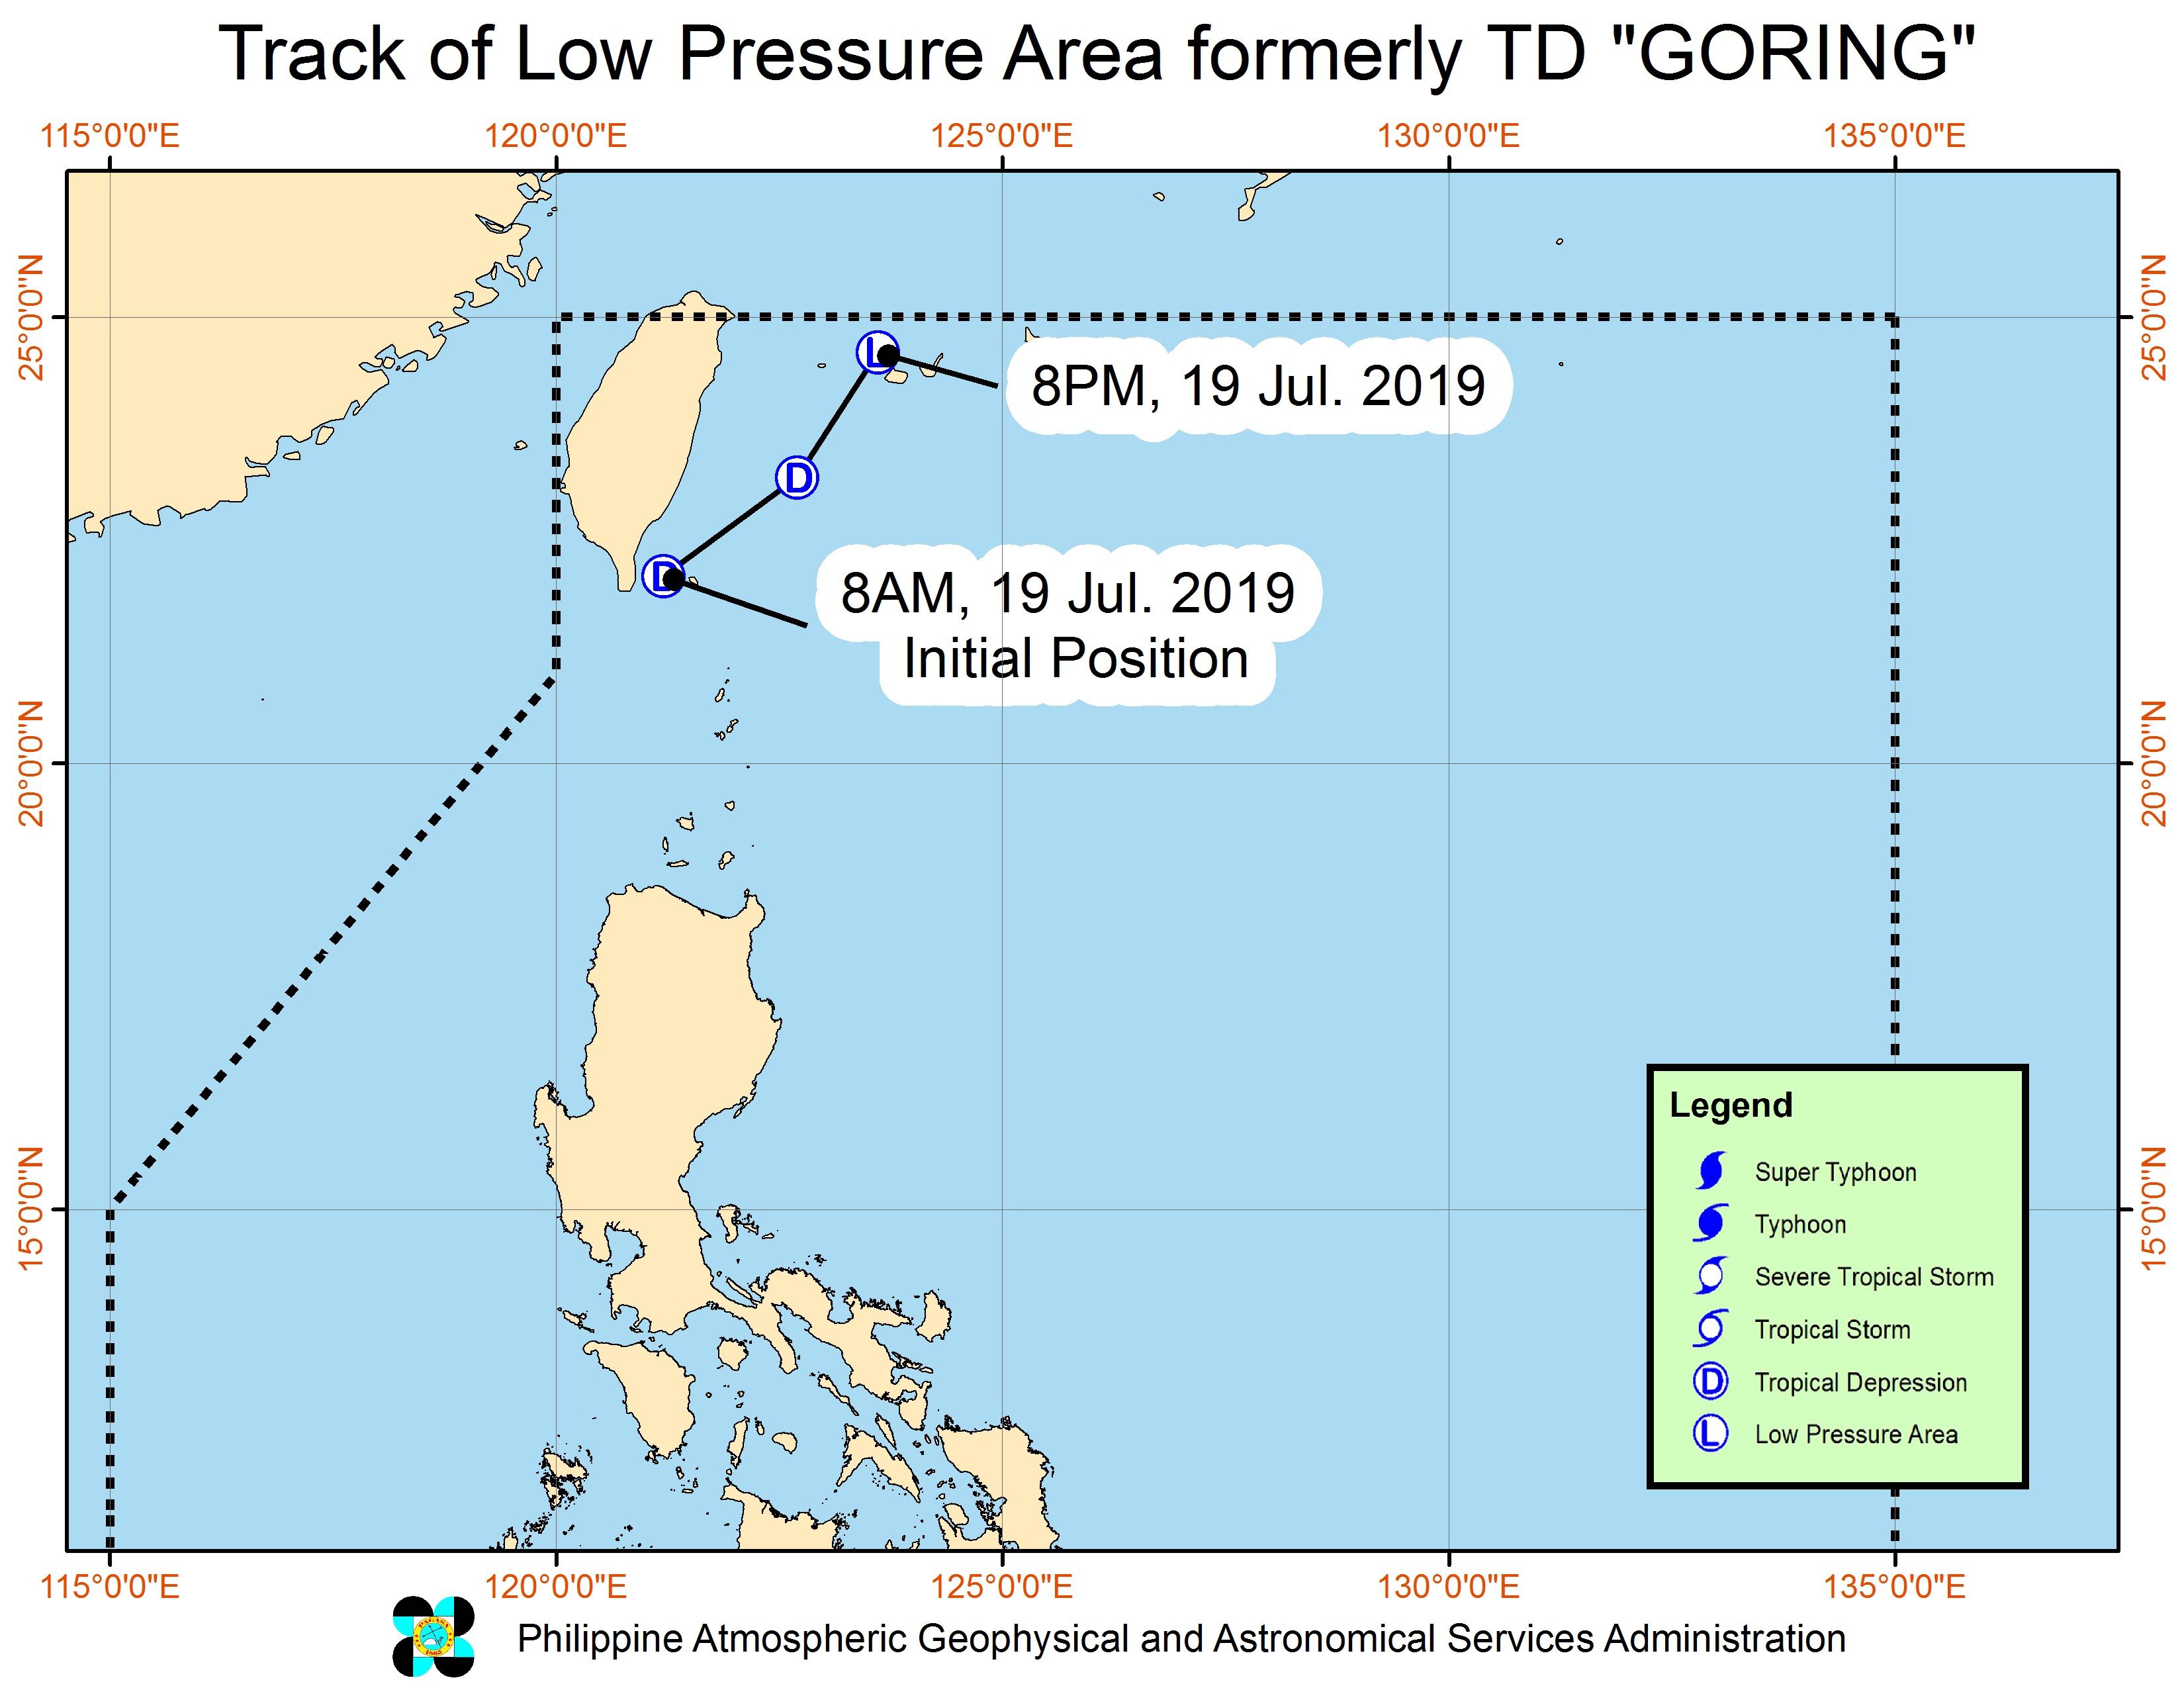 Forecast track of low pressure area which used to be Tropical Depression Goring, as of July 19, 2019, 11 pm. Image from PAGASA 